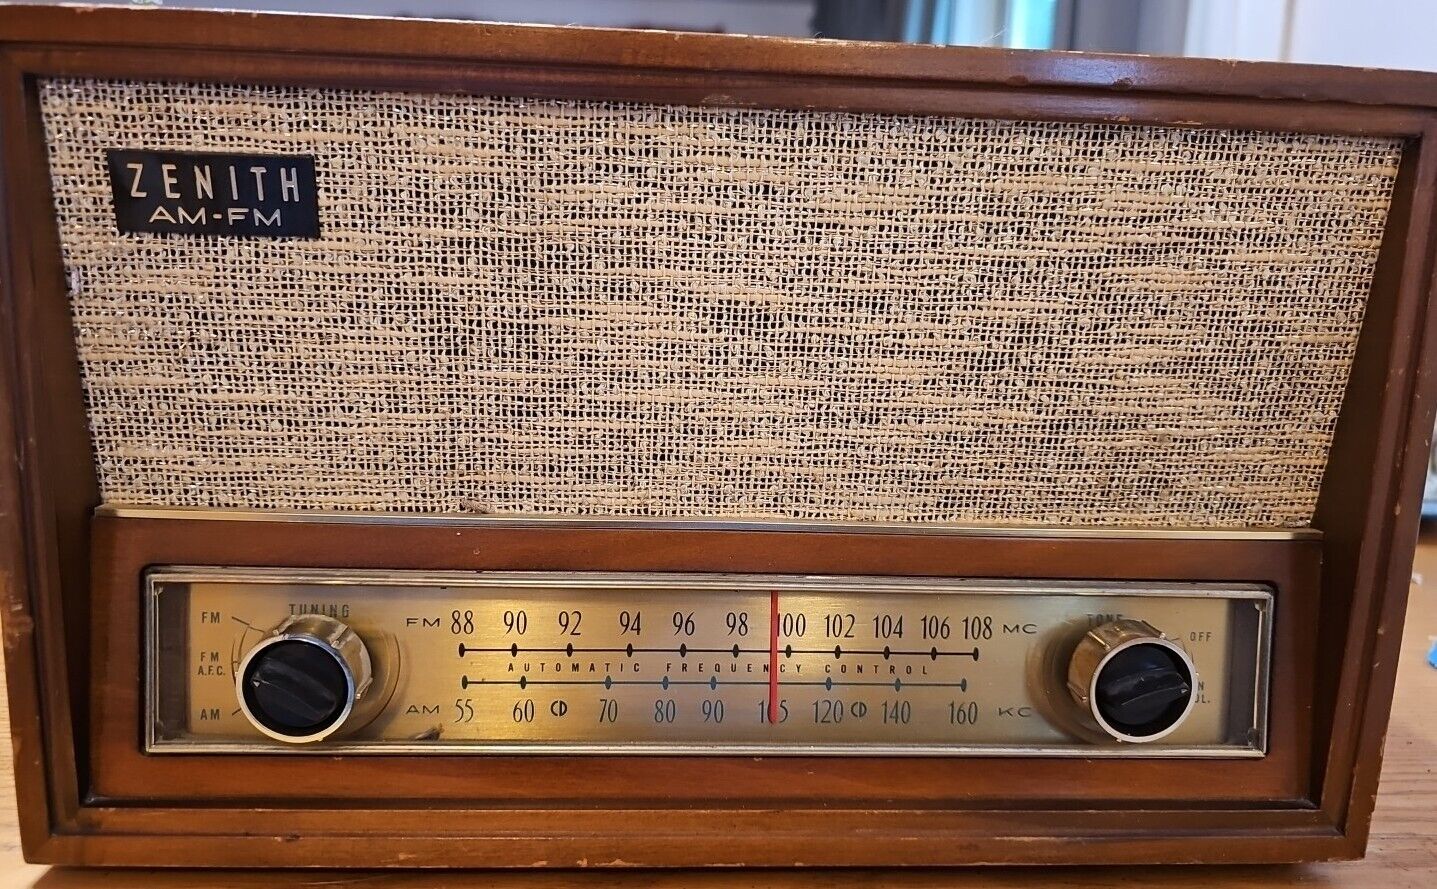 Zenith AM/FM Stereo Tube Radio Model S-50681 in Working Condition Vintage Wood